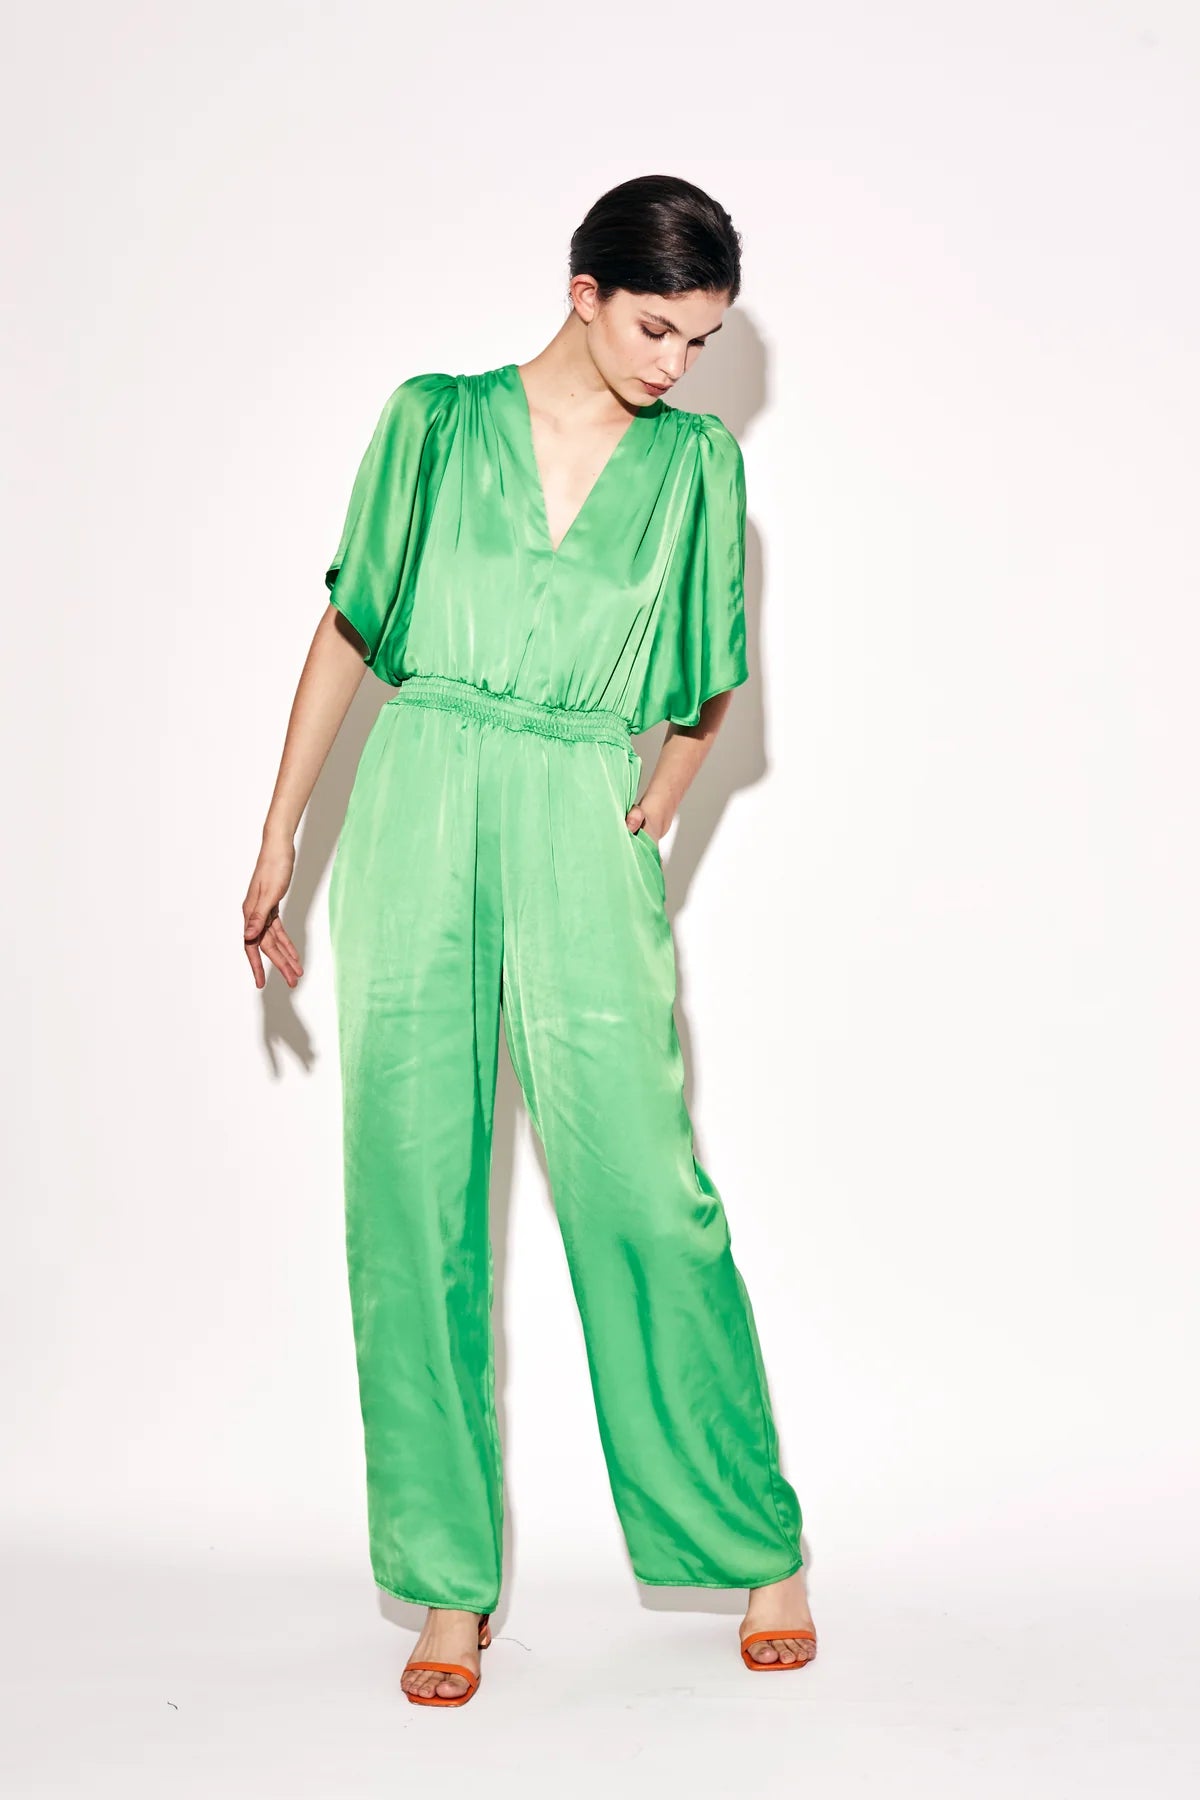 Deluc. Hercules Cinched Waist Jumpsuit in Pargreen